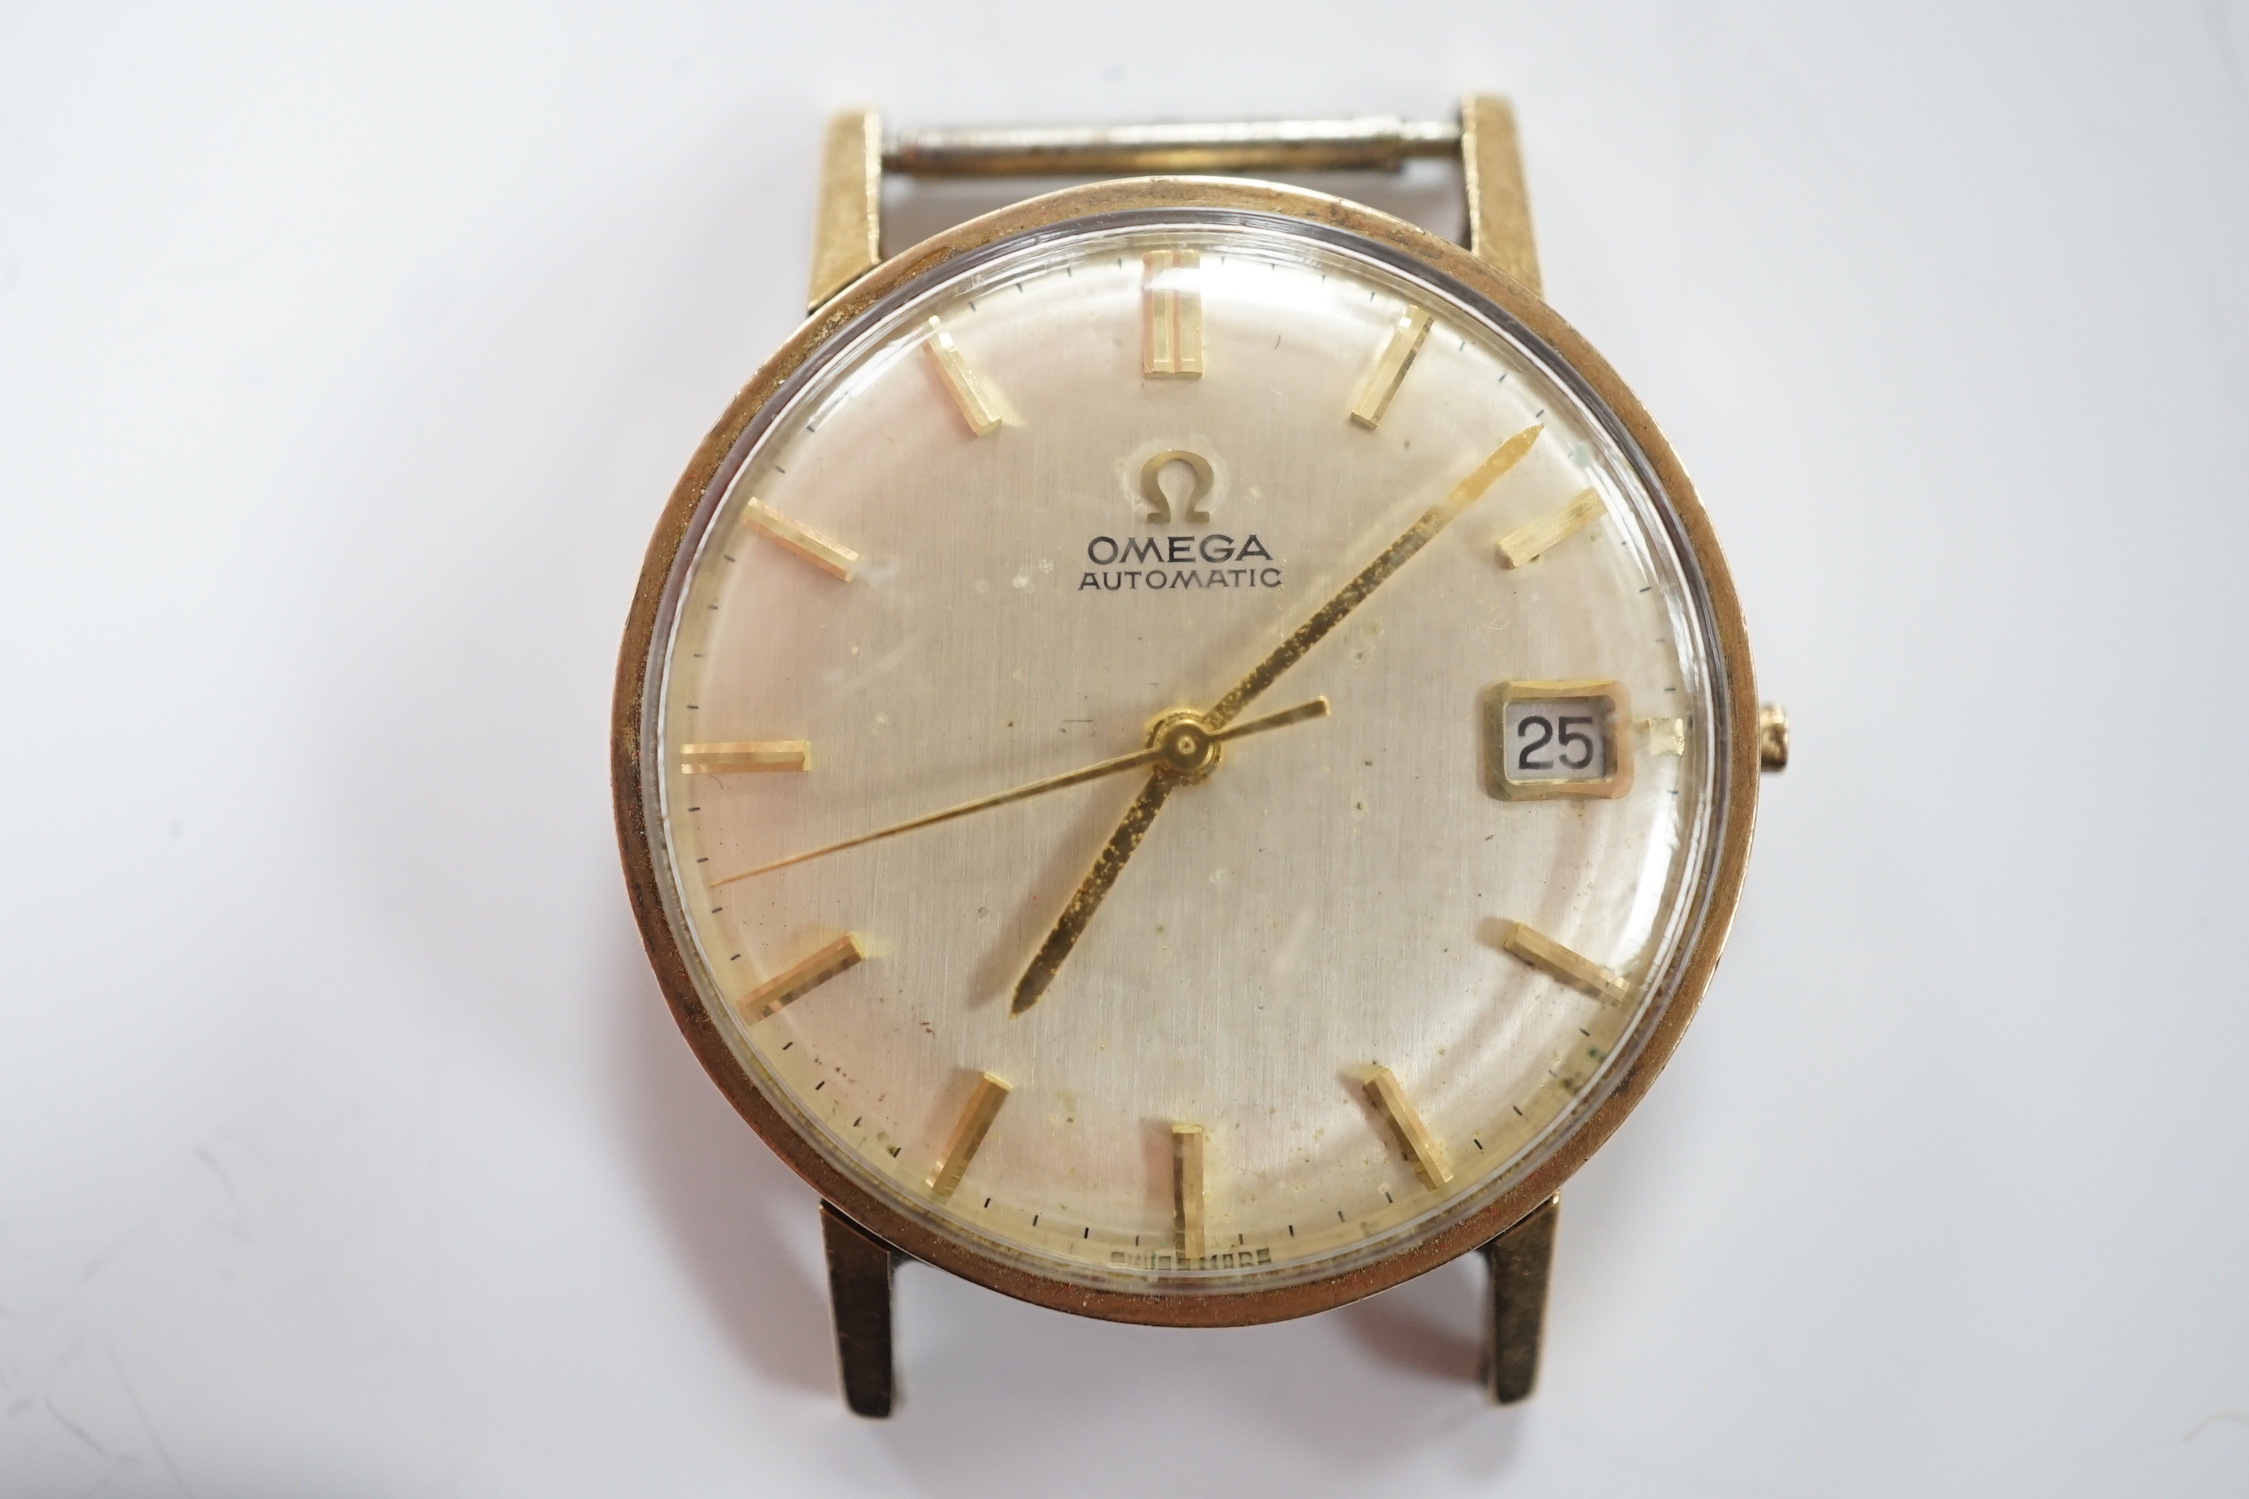 A gentleman's 9ct gold Omega automatic wrist watch, with date aperture, no strap or winding crown.